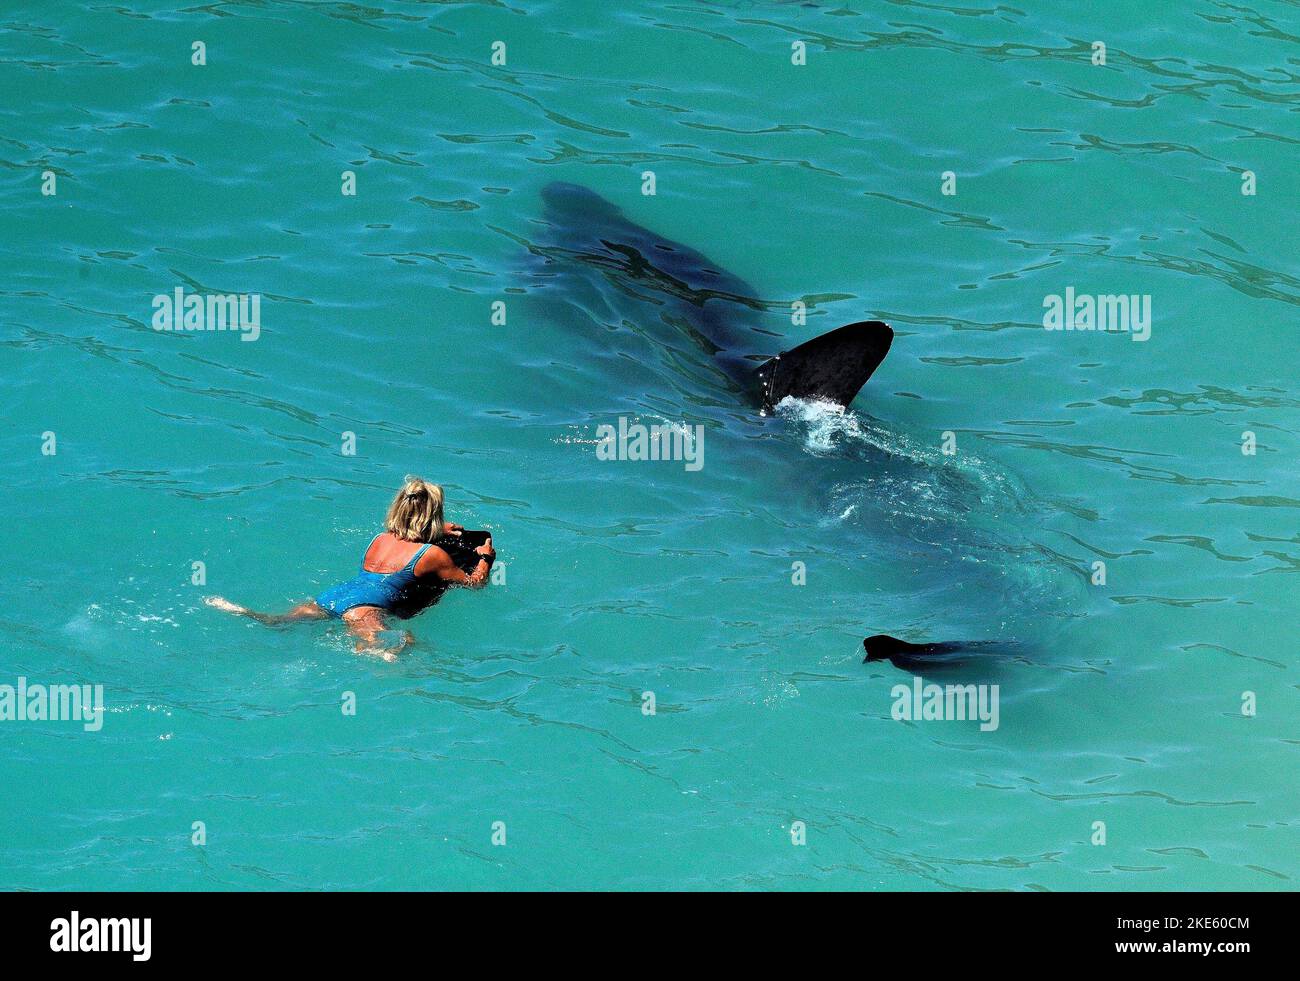 Giant Basking sharks seen in clear blue Cornish seas approaching swimmers. Stock Photo